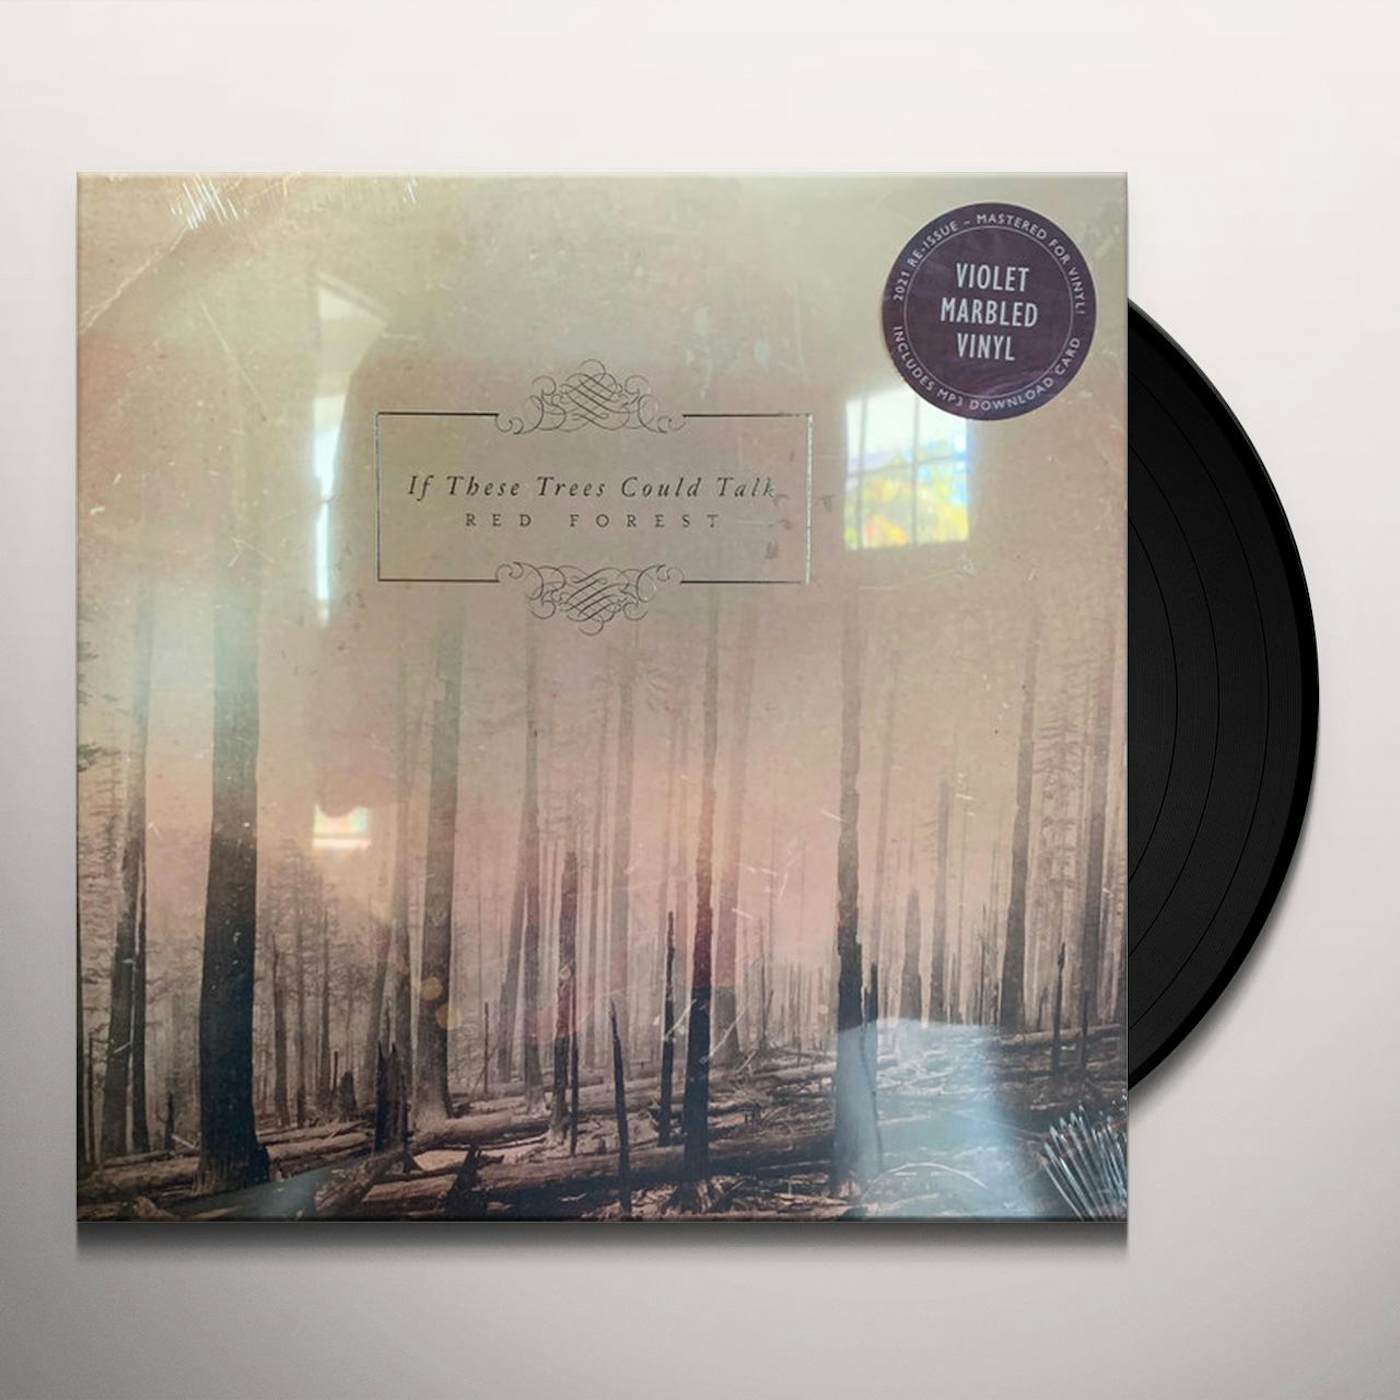 If These Trees Could Talk RED FOREST (VIOLET MARBLE VINYL) Vinyl Record